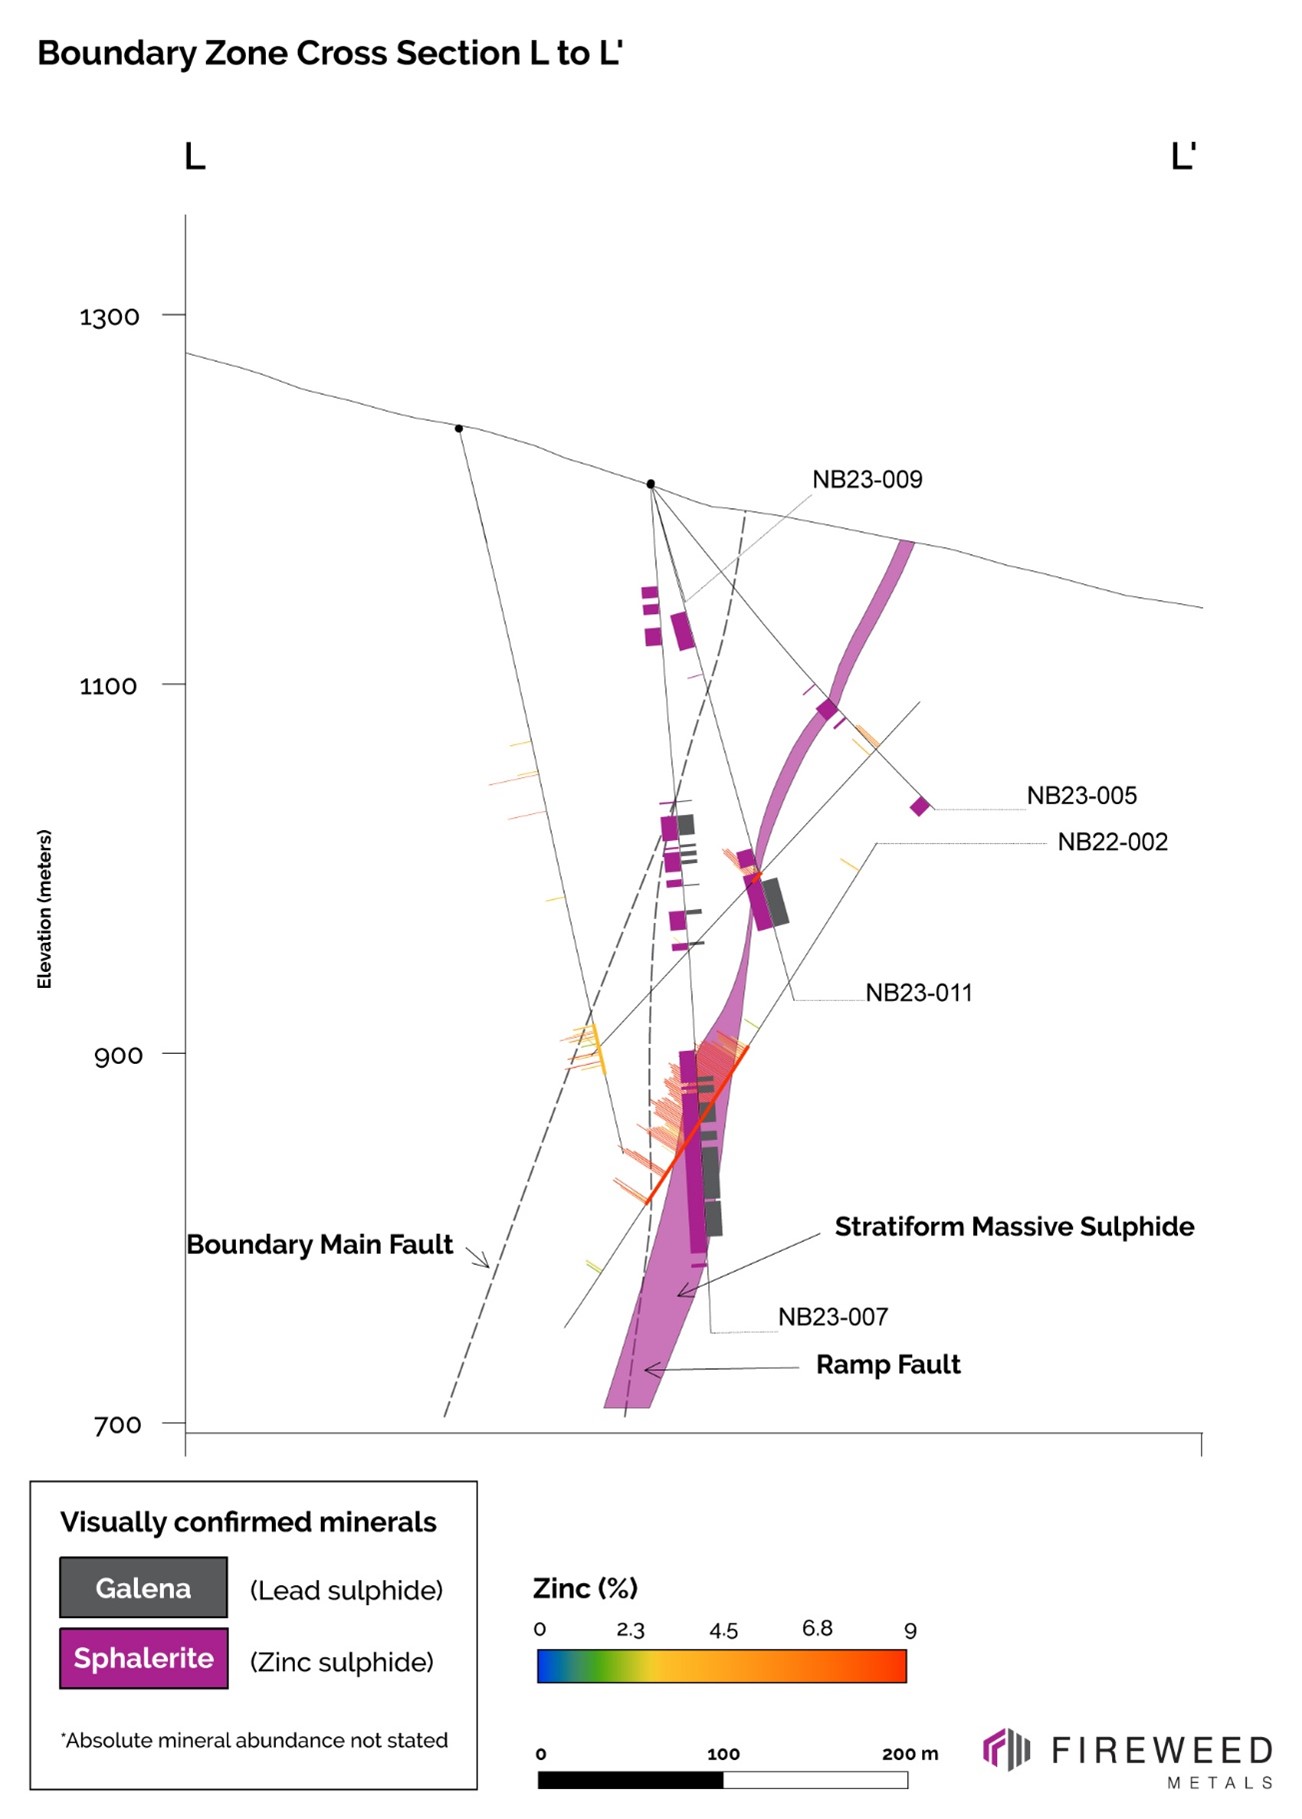 Cross Section L-L’: Mineralized intervals with assays pending in NB23-007, NB23-011, and NB23-005, including a very long interval of massive sulphide in hole NB23-007 following up from NB22-002.